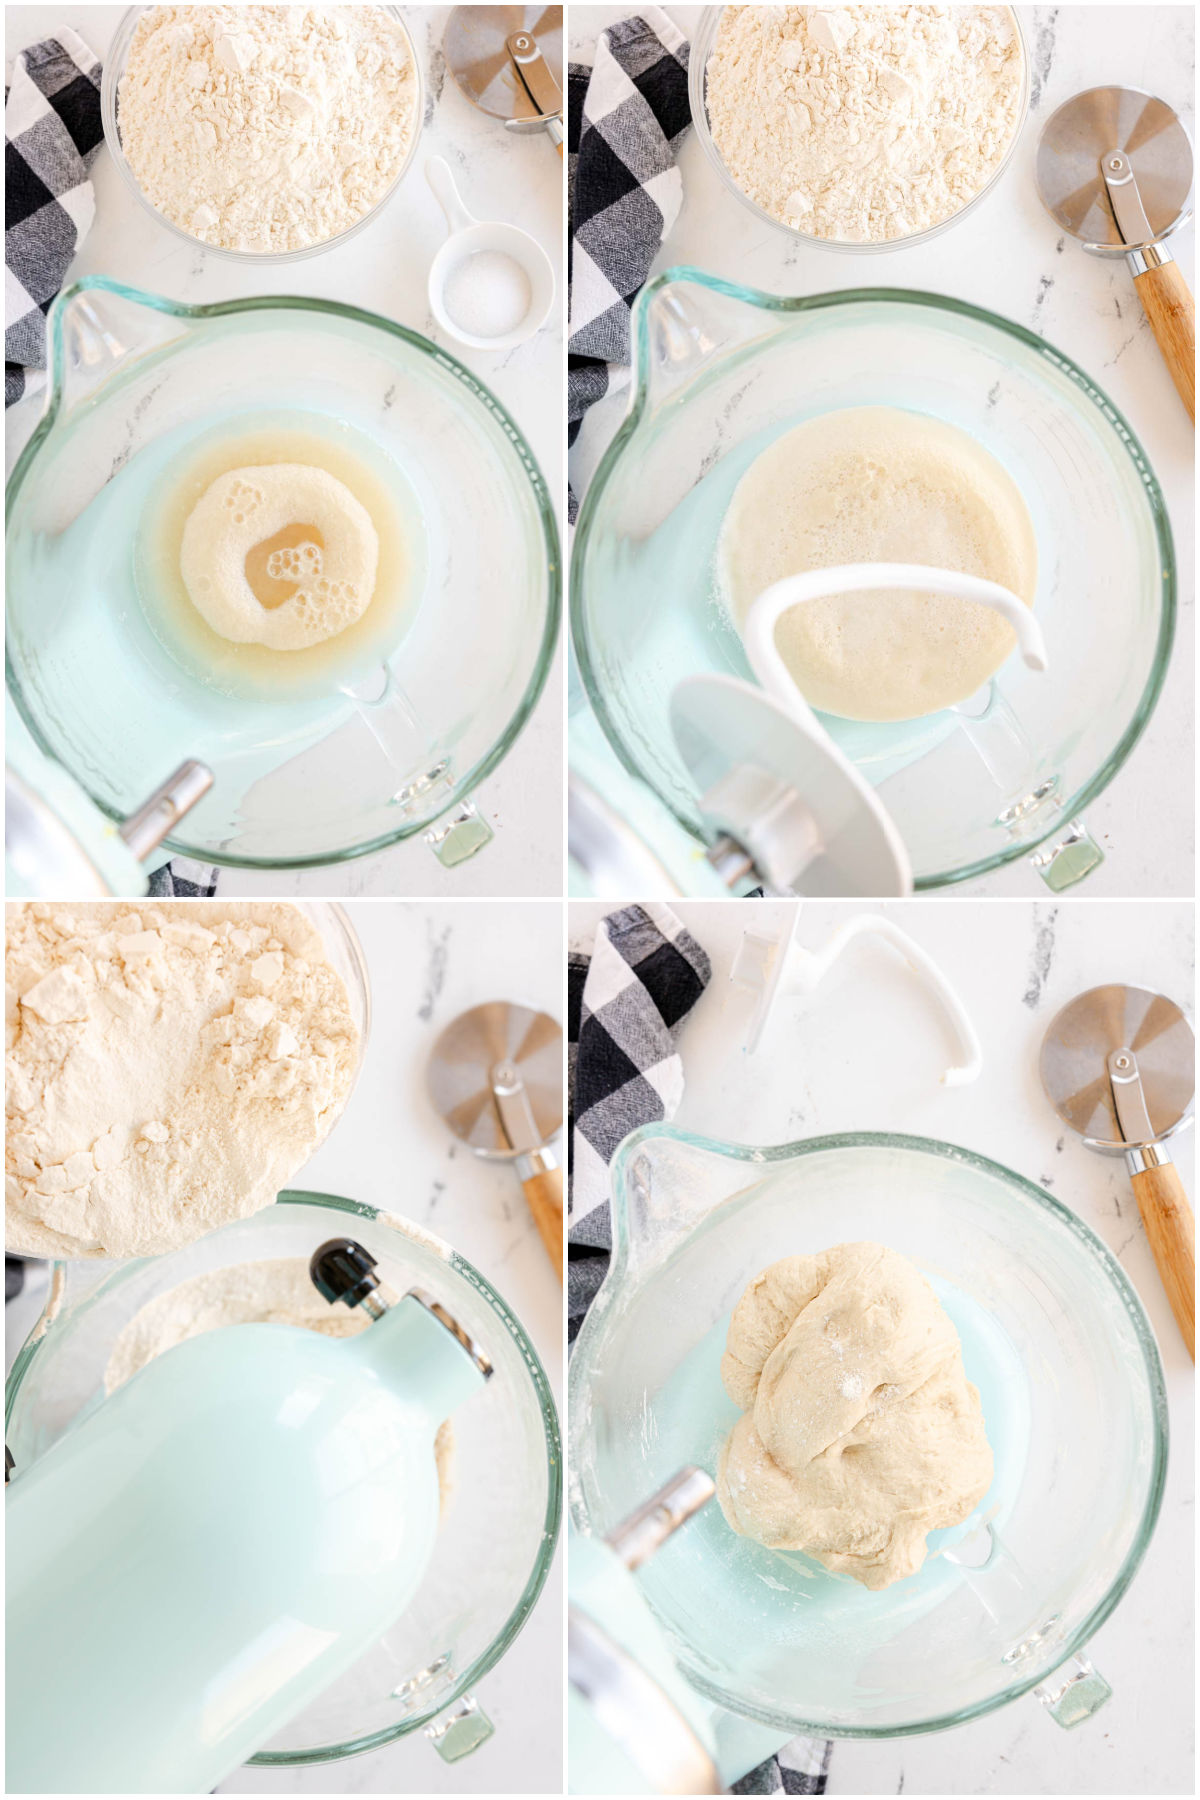 four images showing how to make homemade pizza dough in a stand mixer